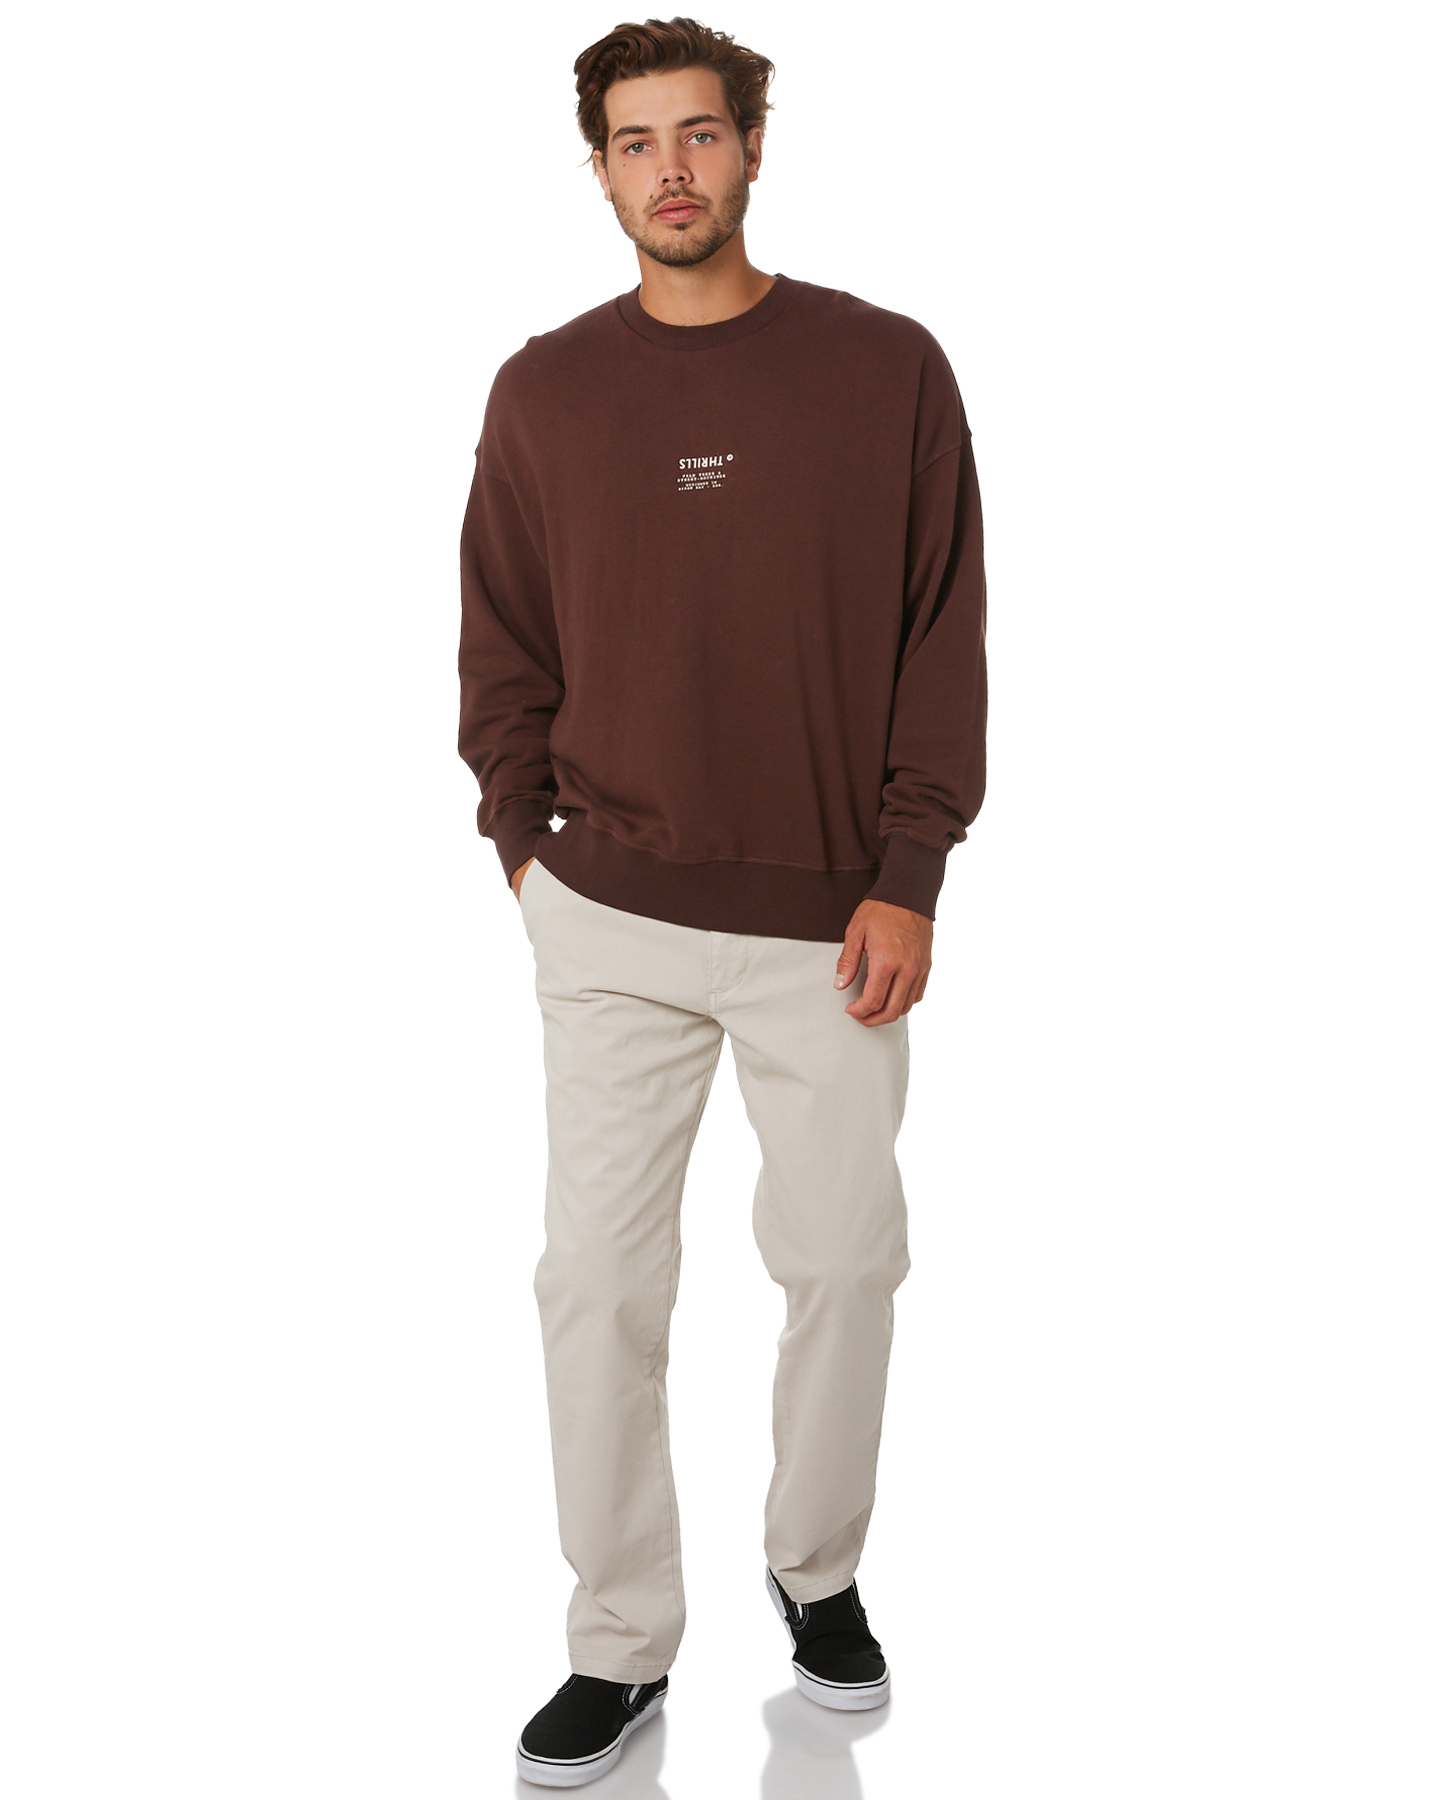 Thrills Liberty Slouch Mens Crew - French Roast | SurfStitch